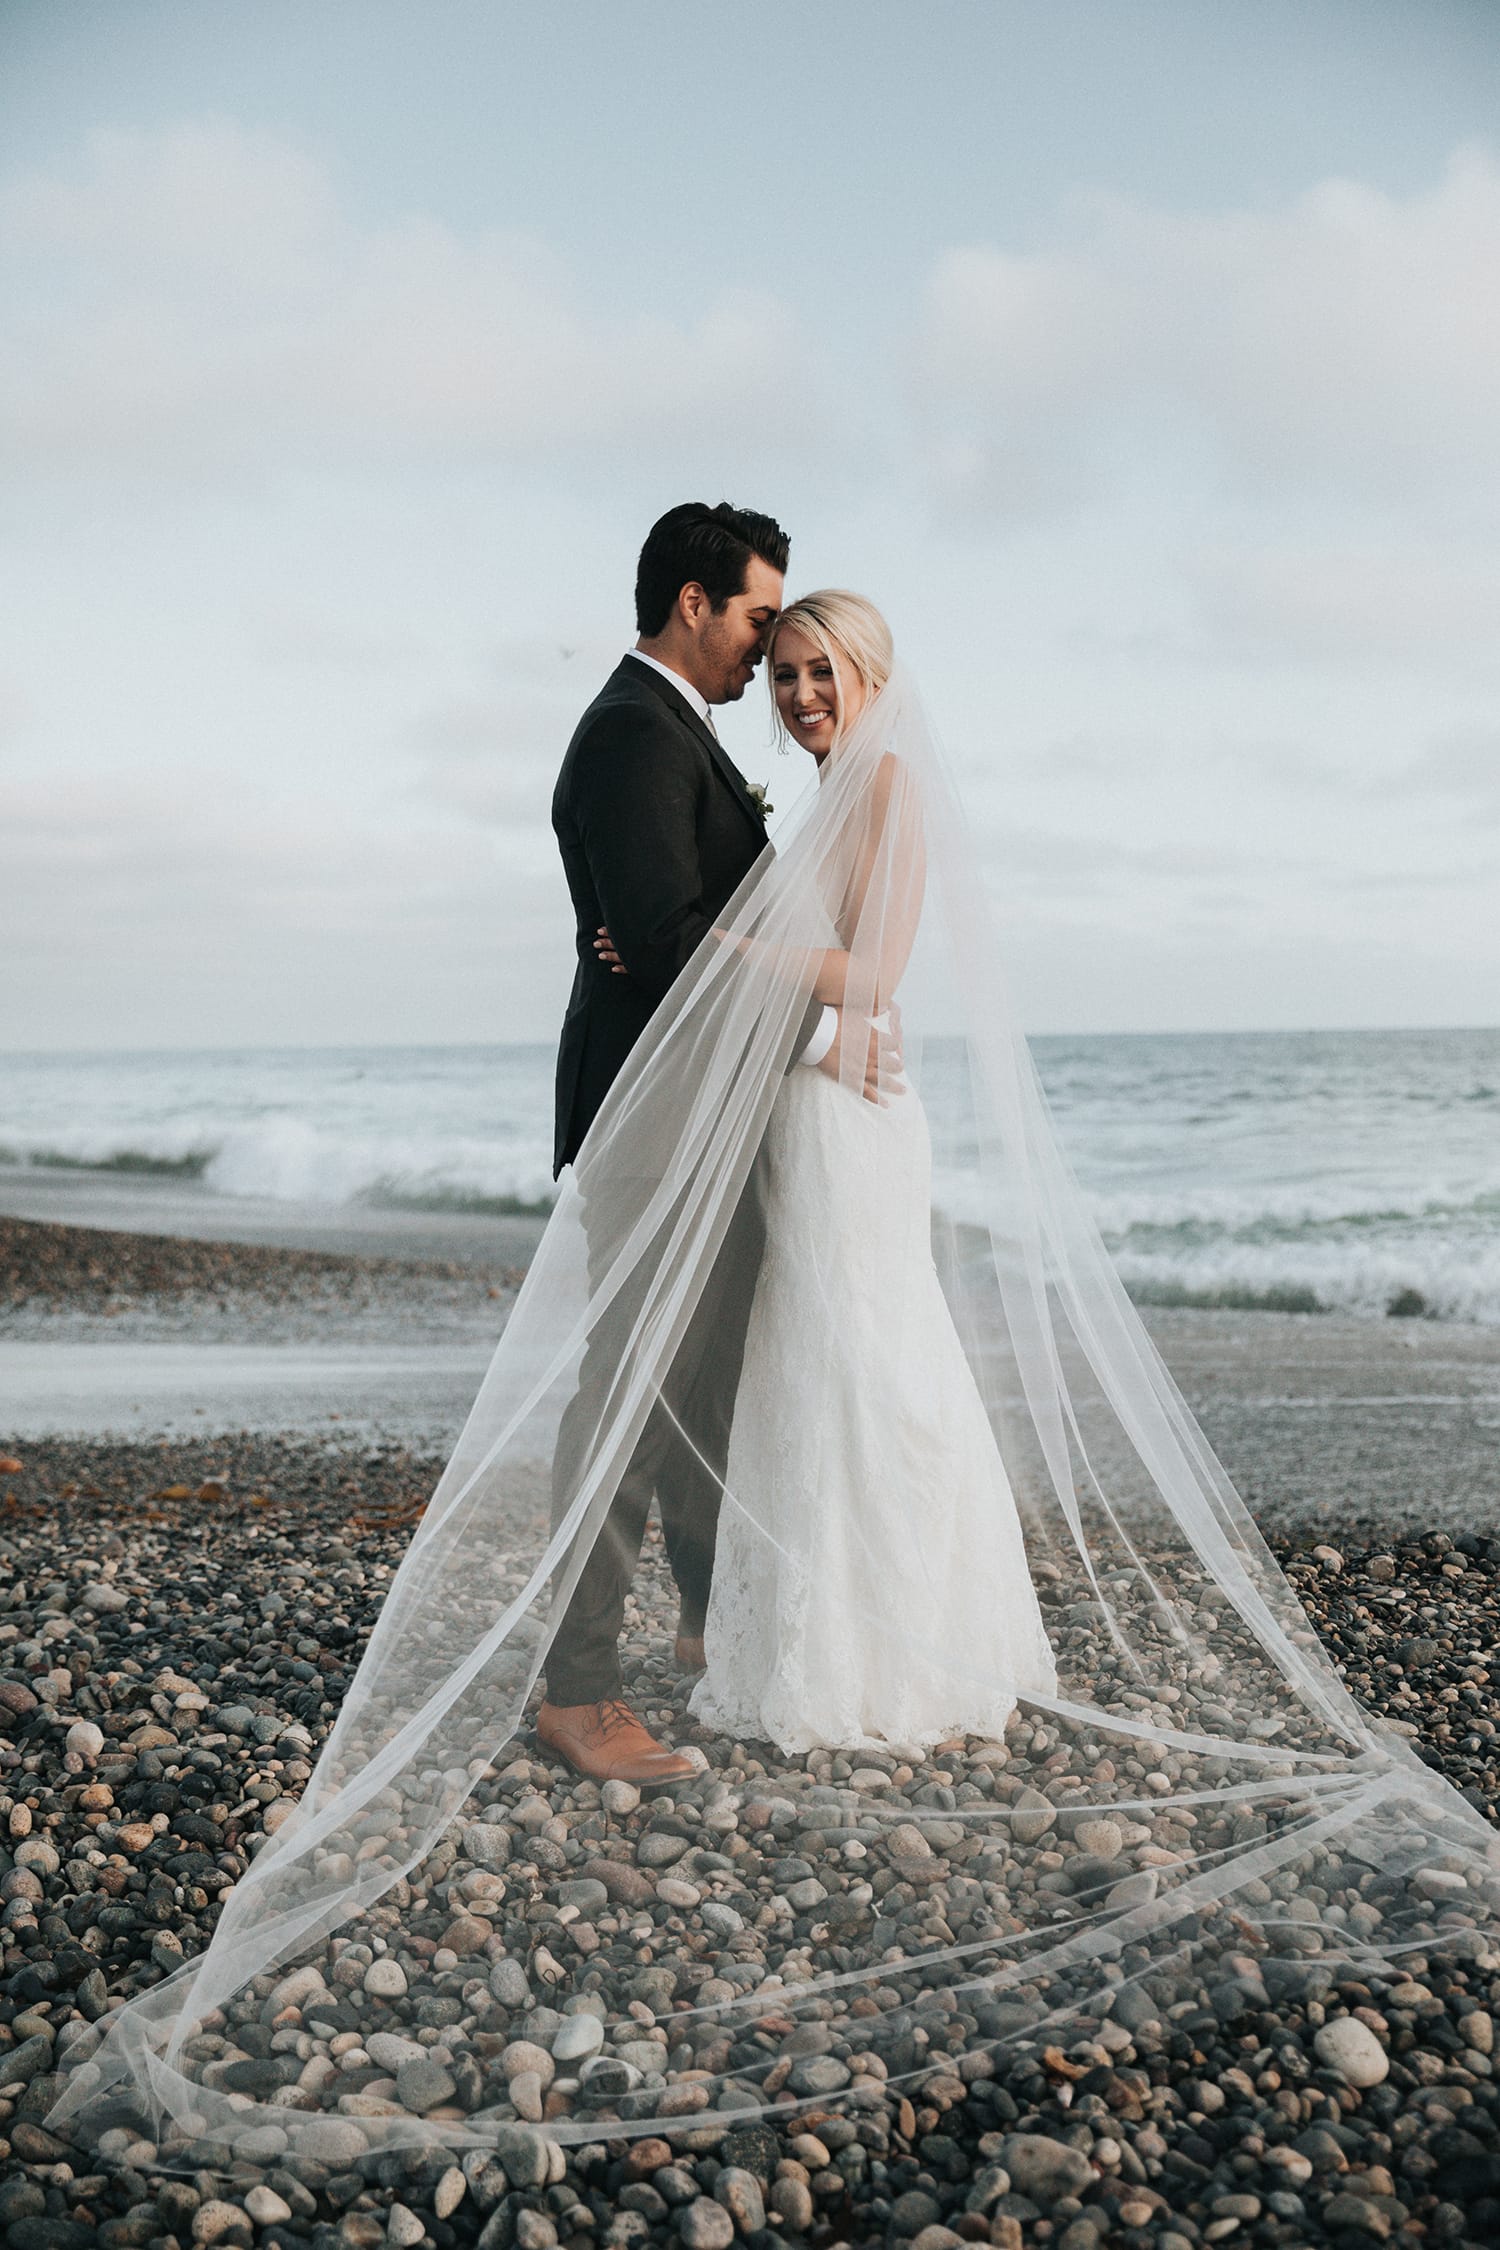 How To Choose The Right Photos To Include In Your Wedding Album